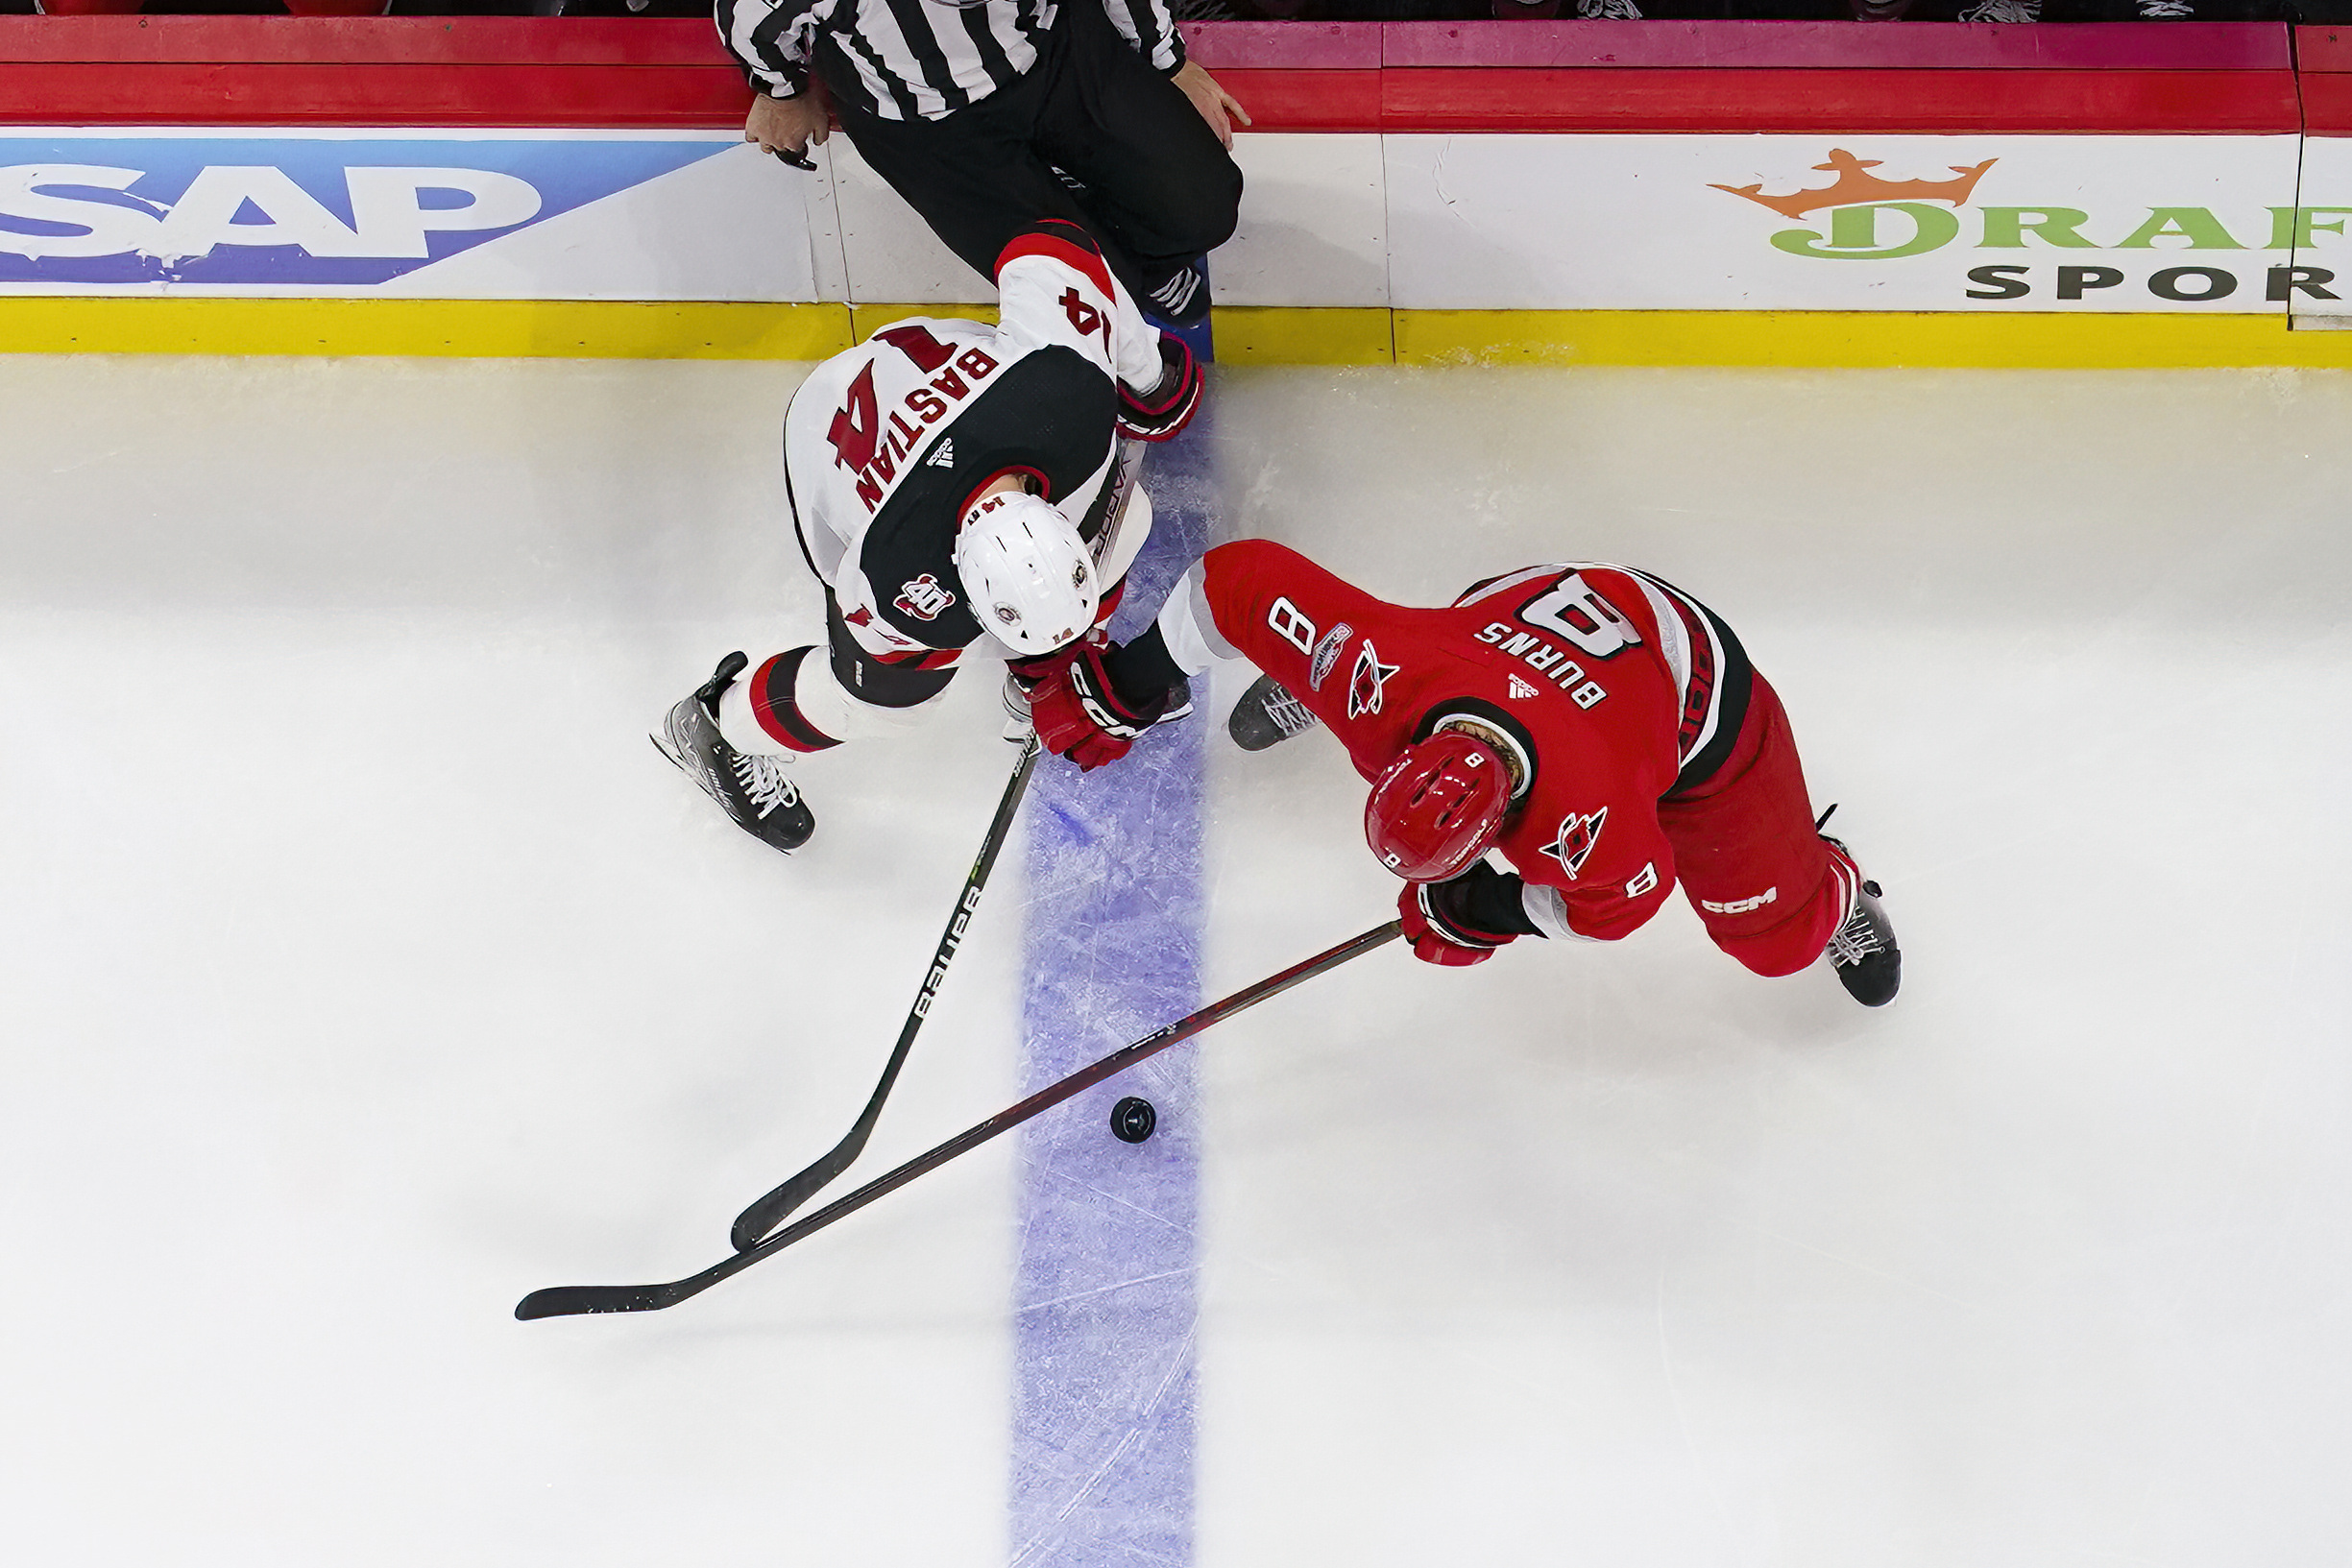 NHL: Carolina Hurricanes top Devils 5-1 in Game 1 of 2nd round